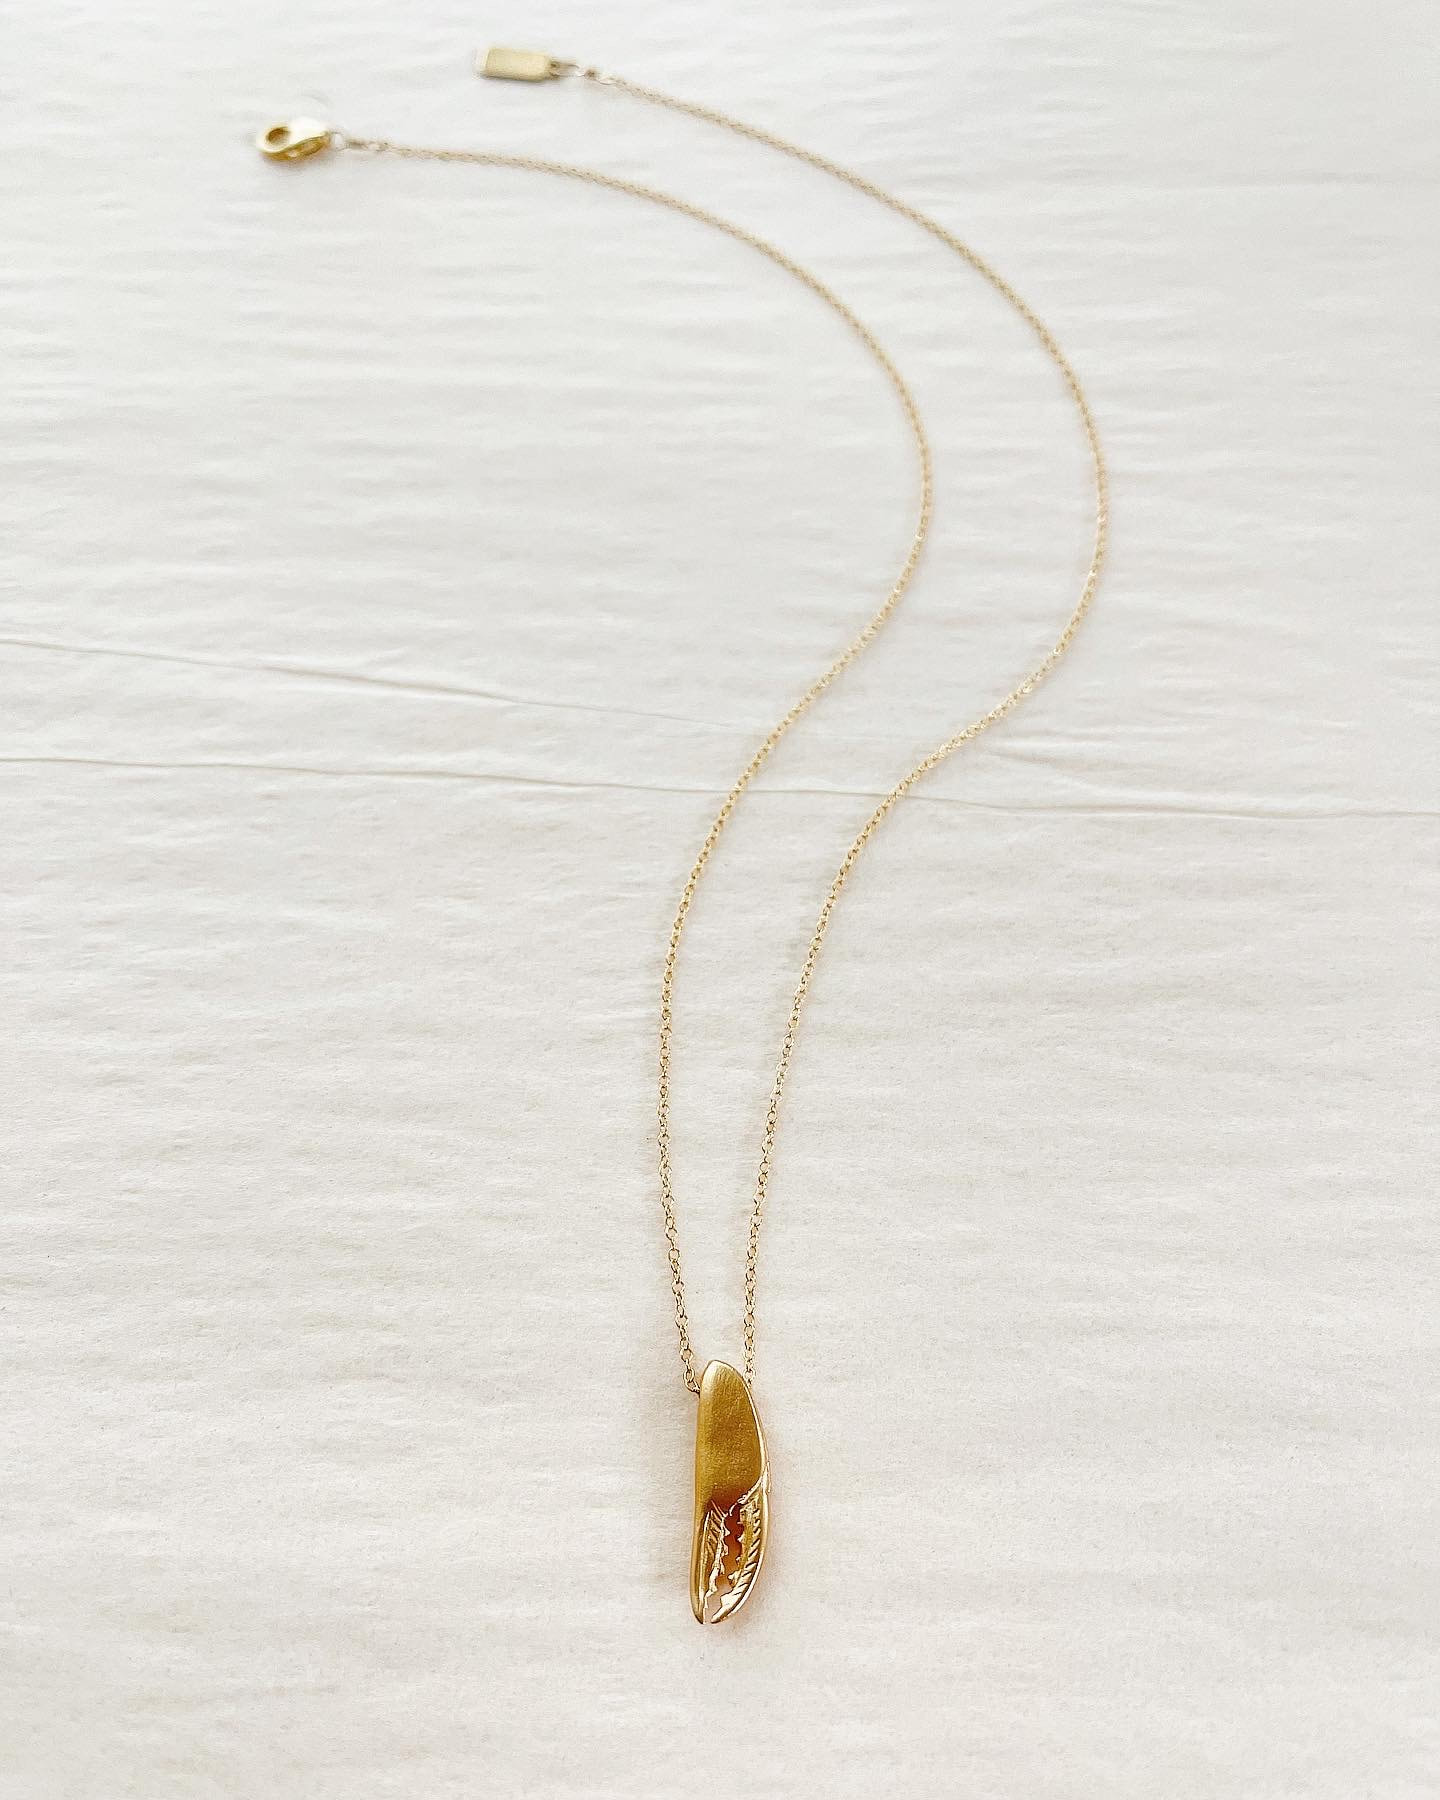 Crab Claw Necklace | Aquinnah Jewelry | Connecticut USA | Martha's ...